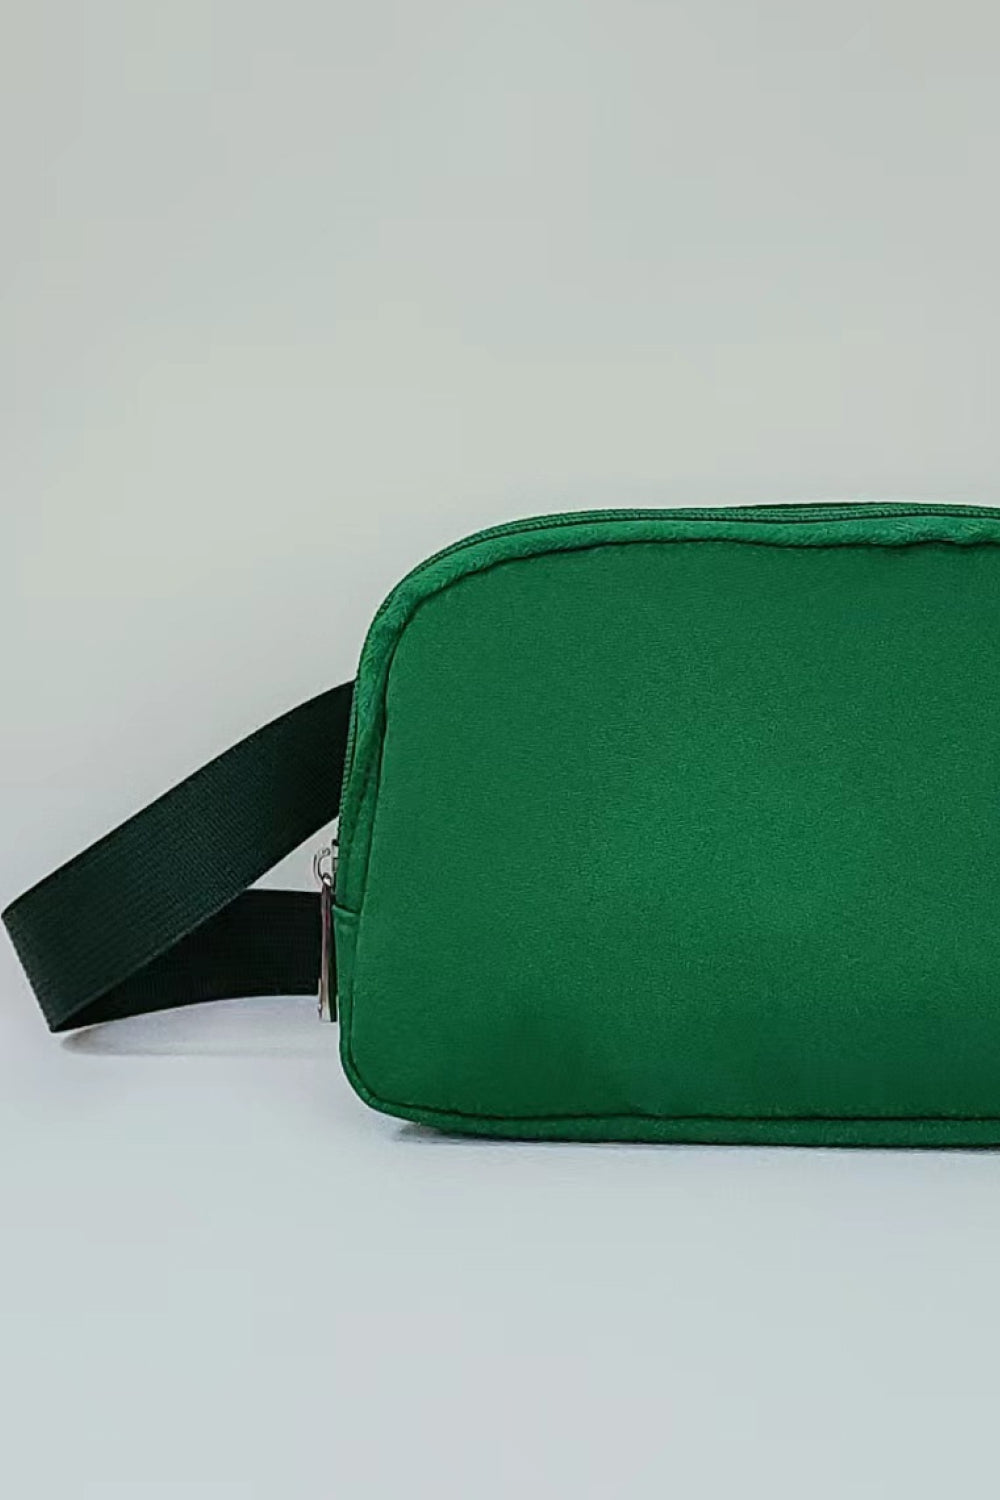 Buckle Zip Closure Fanny Pack COCO CRESS